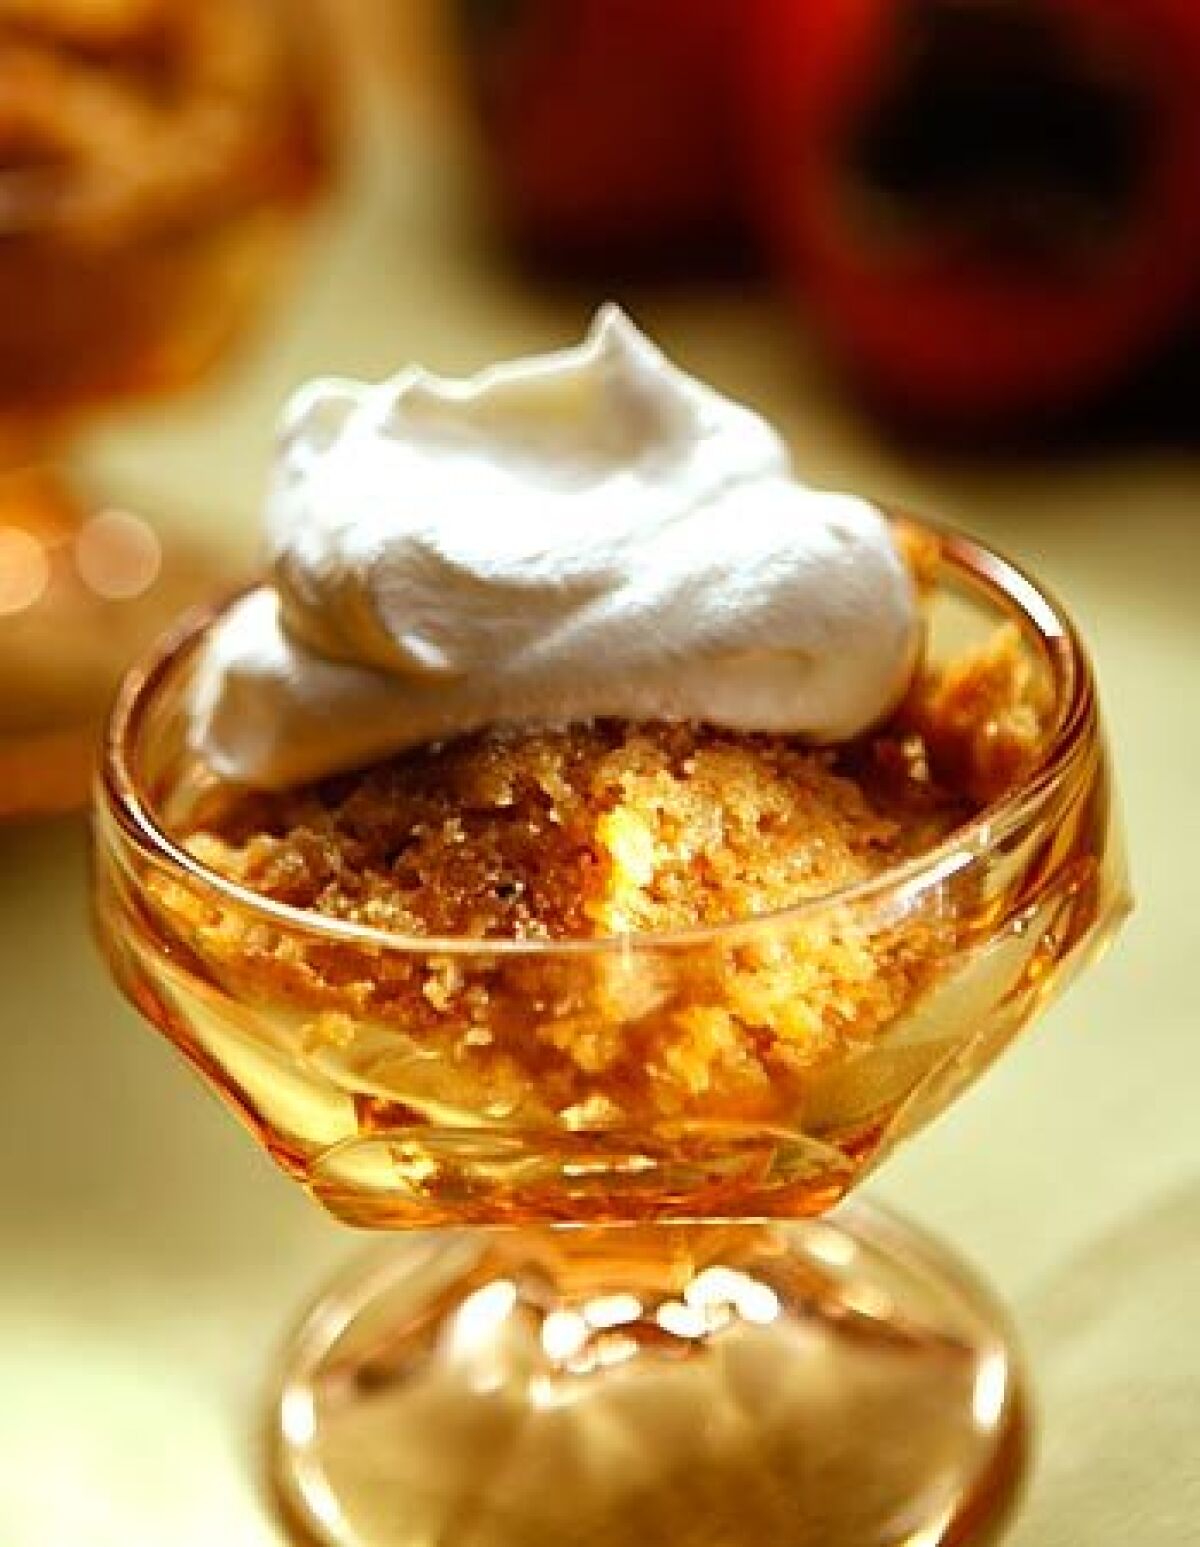 This recipe is best served hot from the oven topped with whipped cream, chopped pecans or -- better yet -- butter pecan ice cream. Recipe: Persimmon pudding